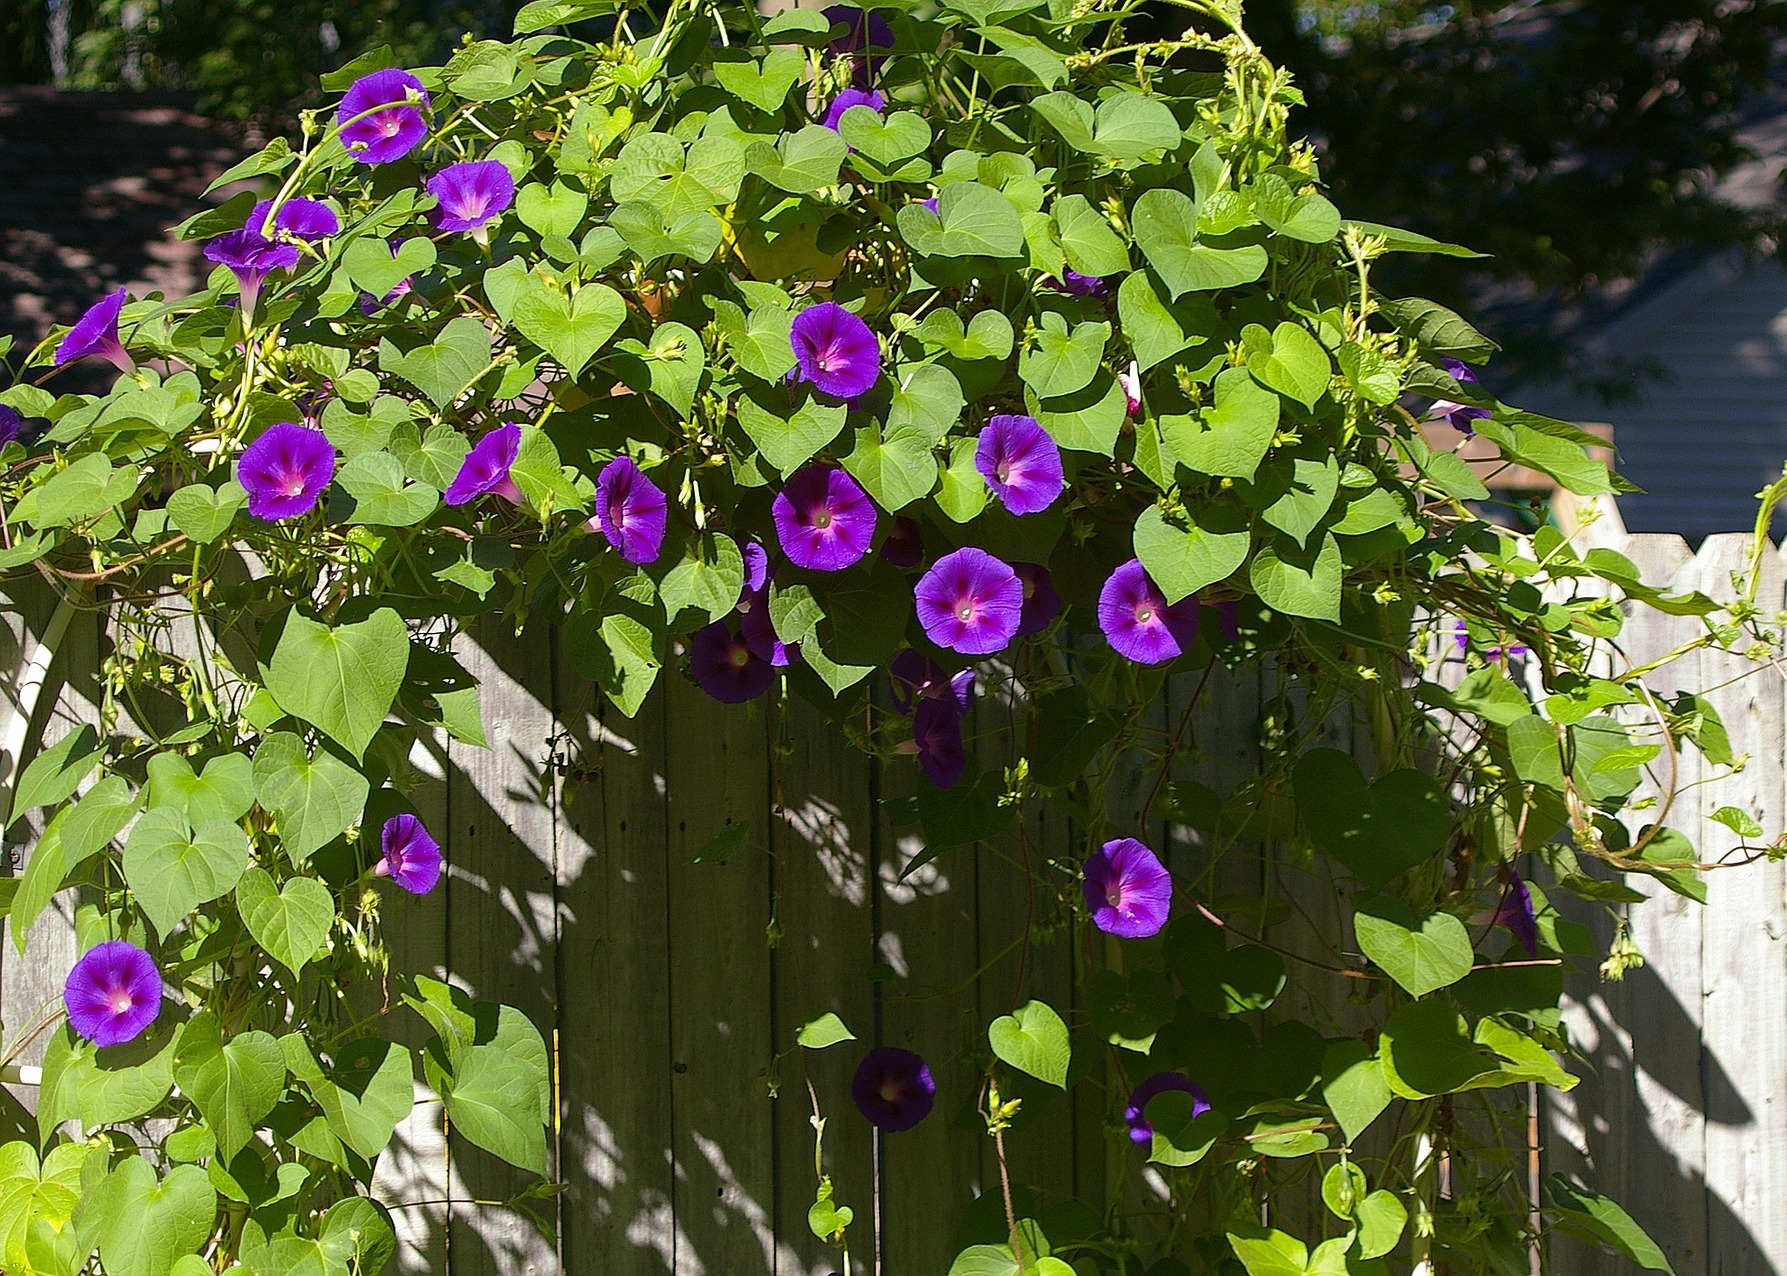 Purple morning glory vining over a wooden fence